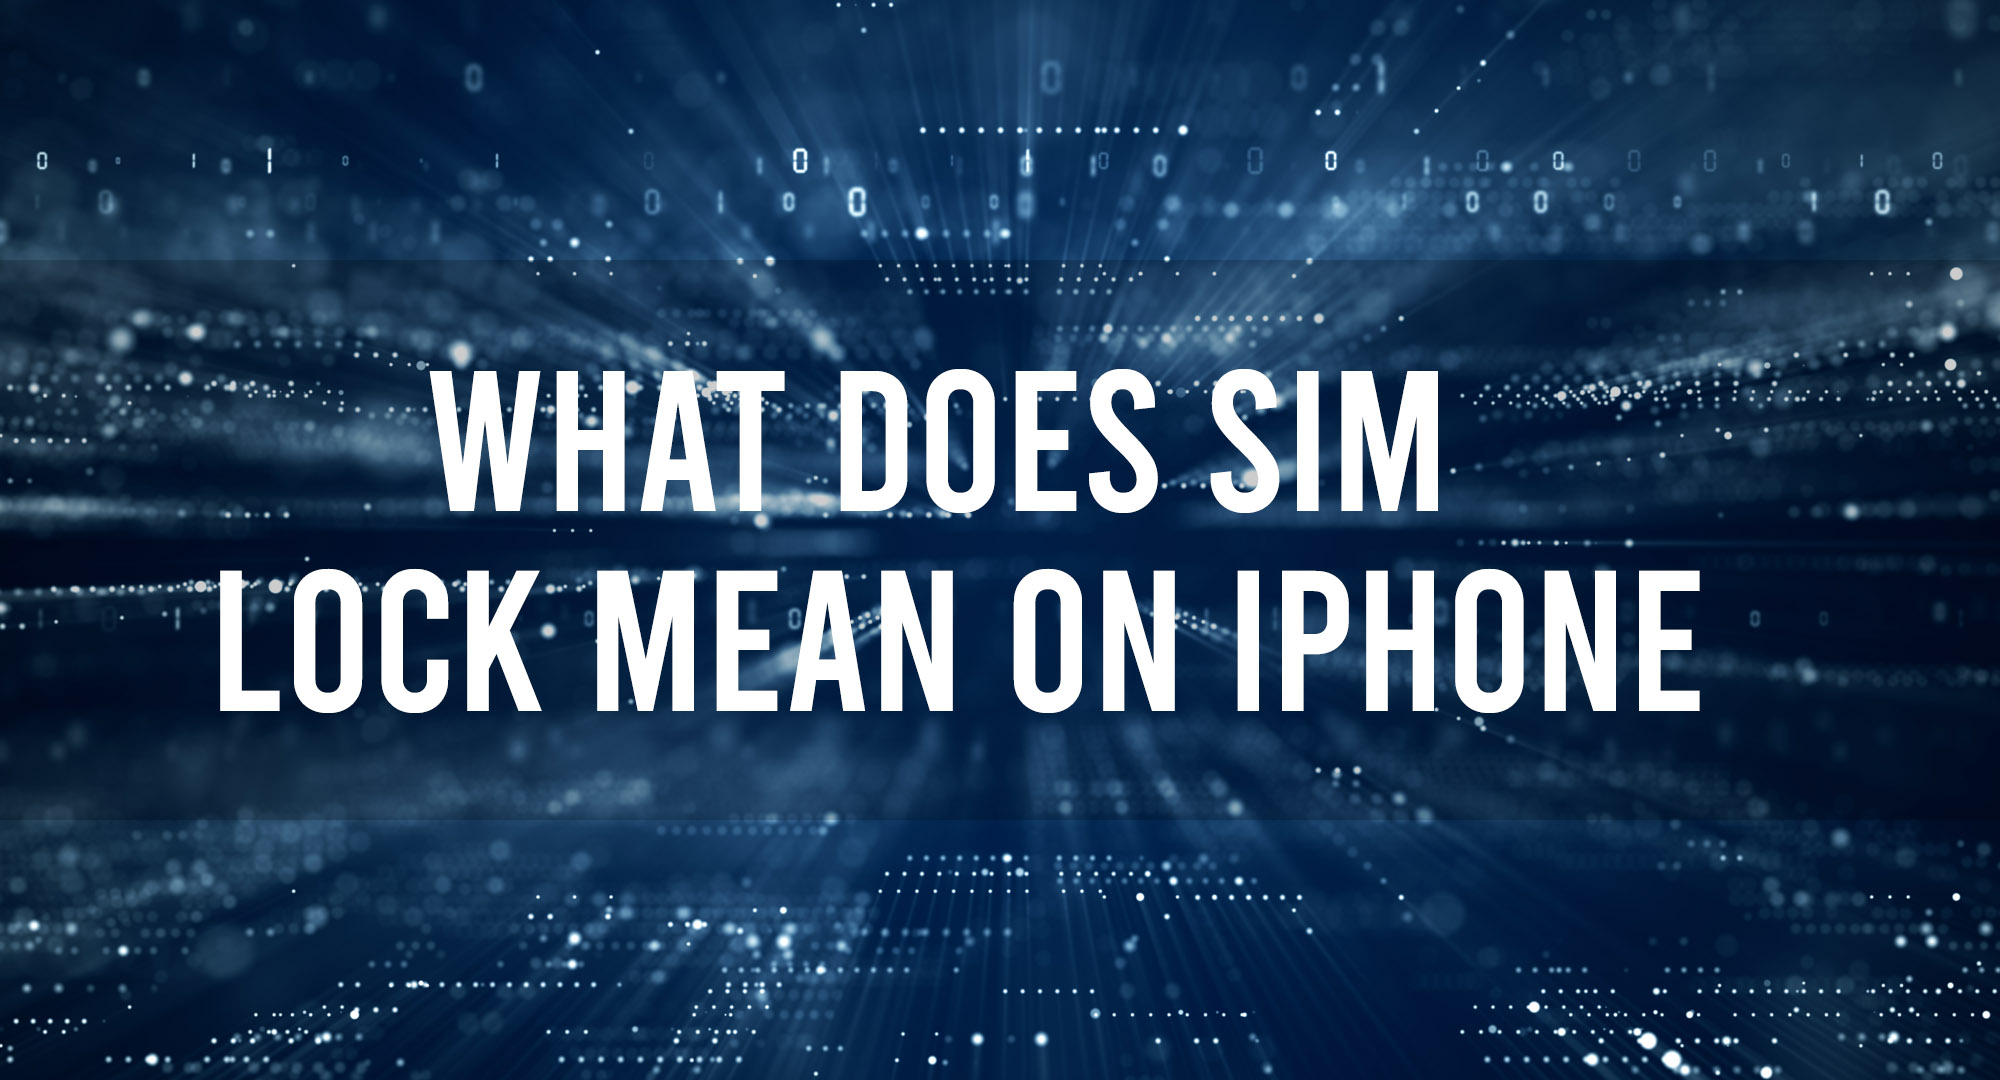 What does SIM Lock Mean on Iphone